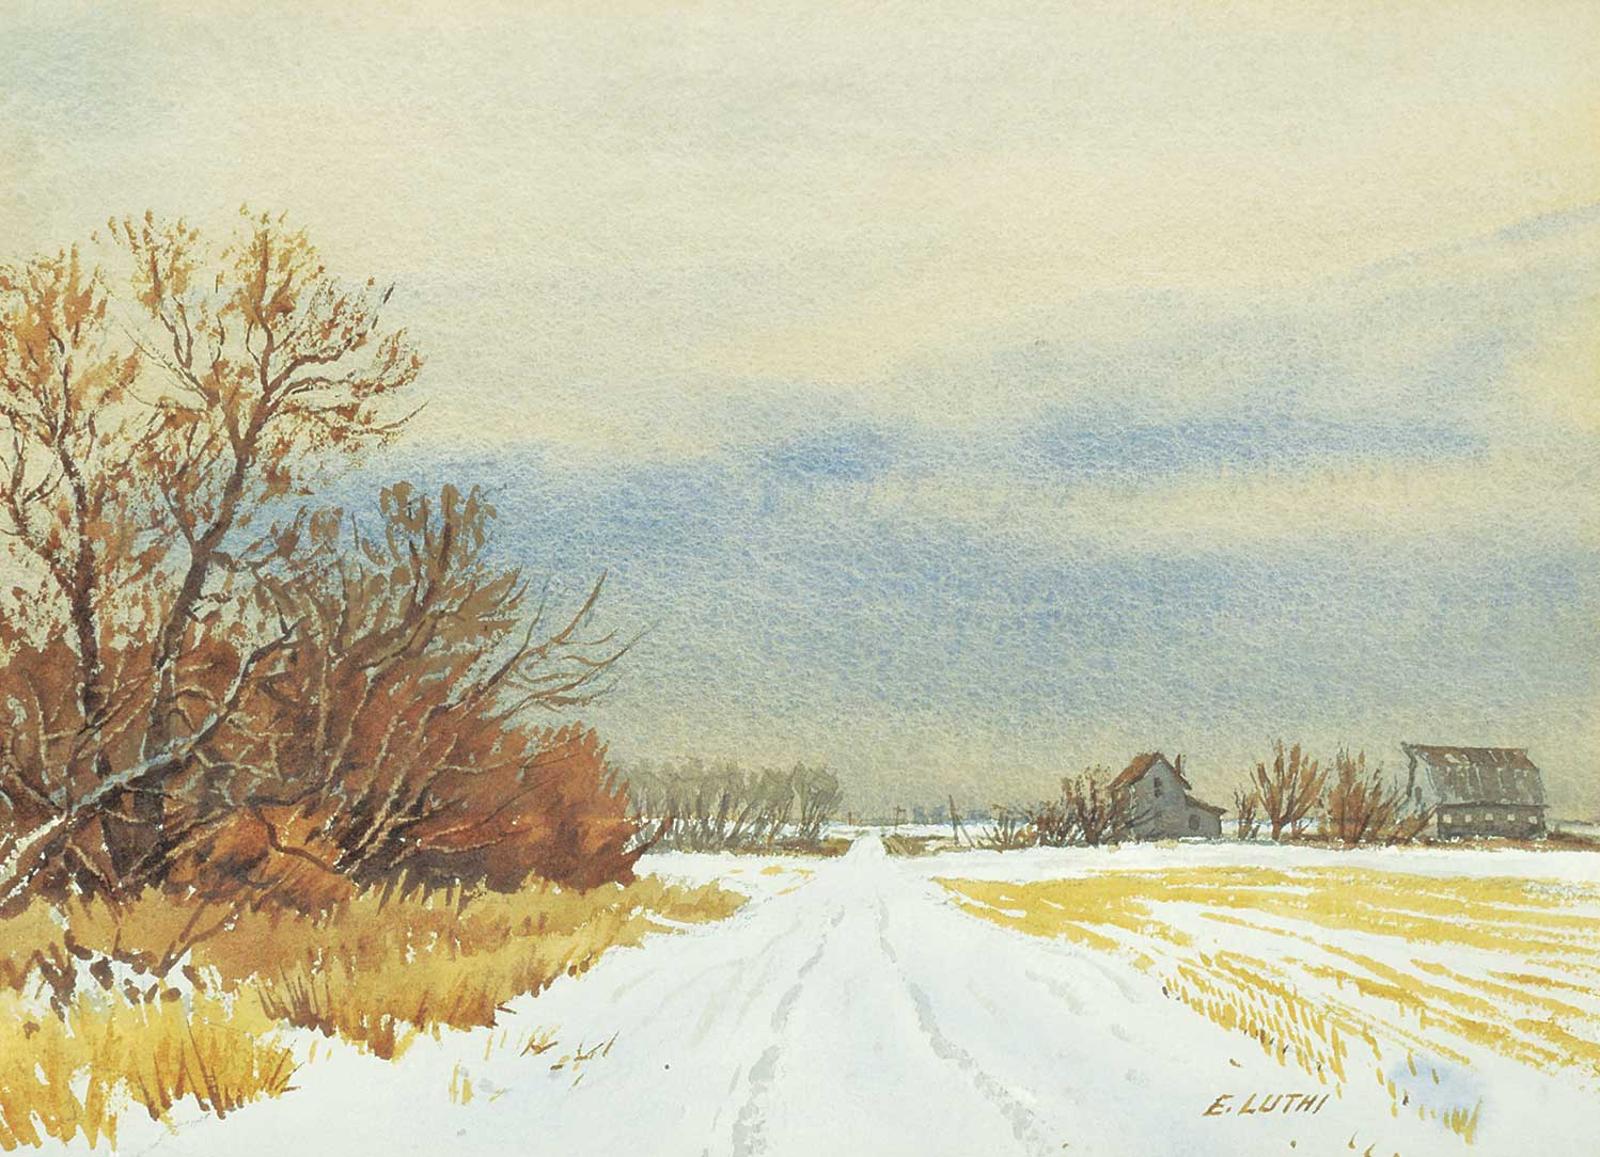 Ernest (Ernie) Luthi (1906-1983) - Untitled - The Road Home